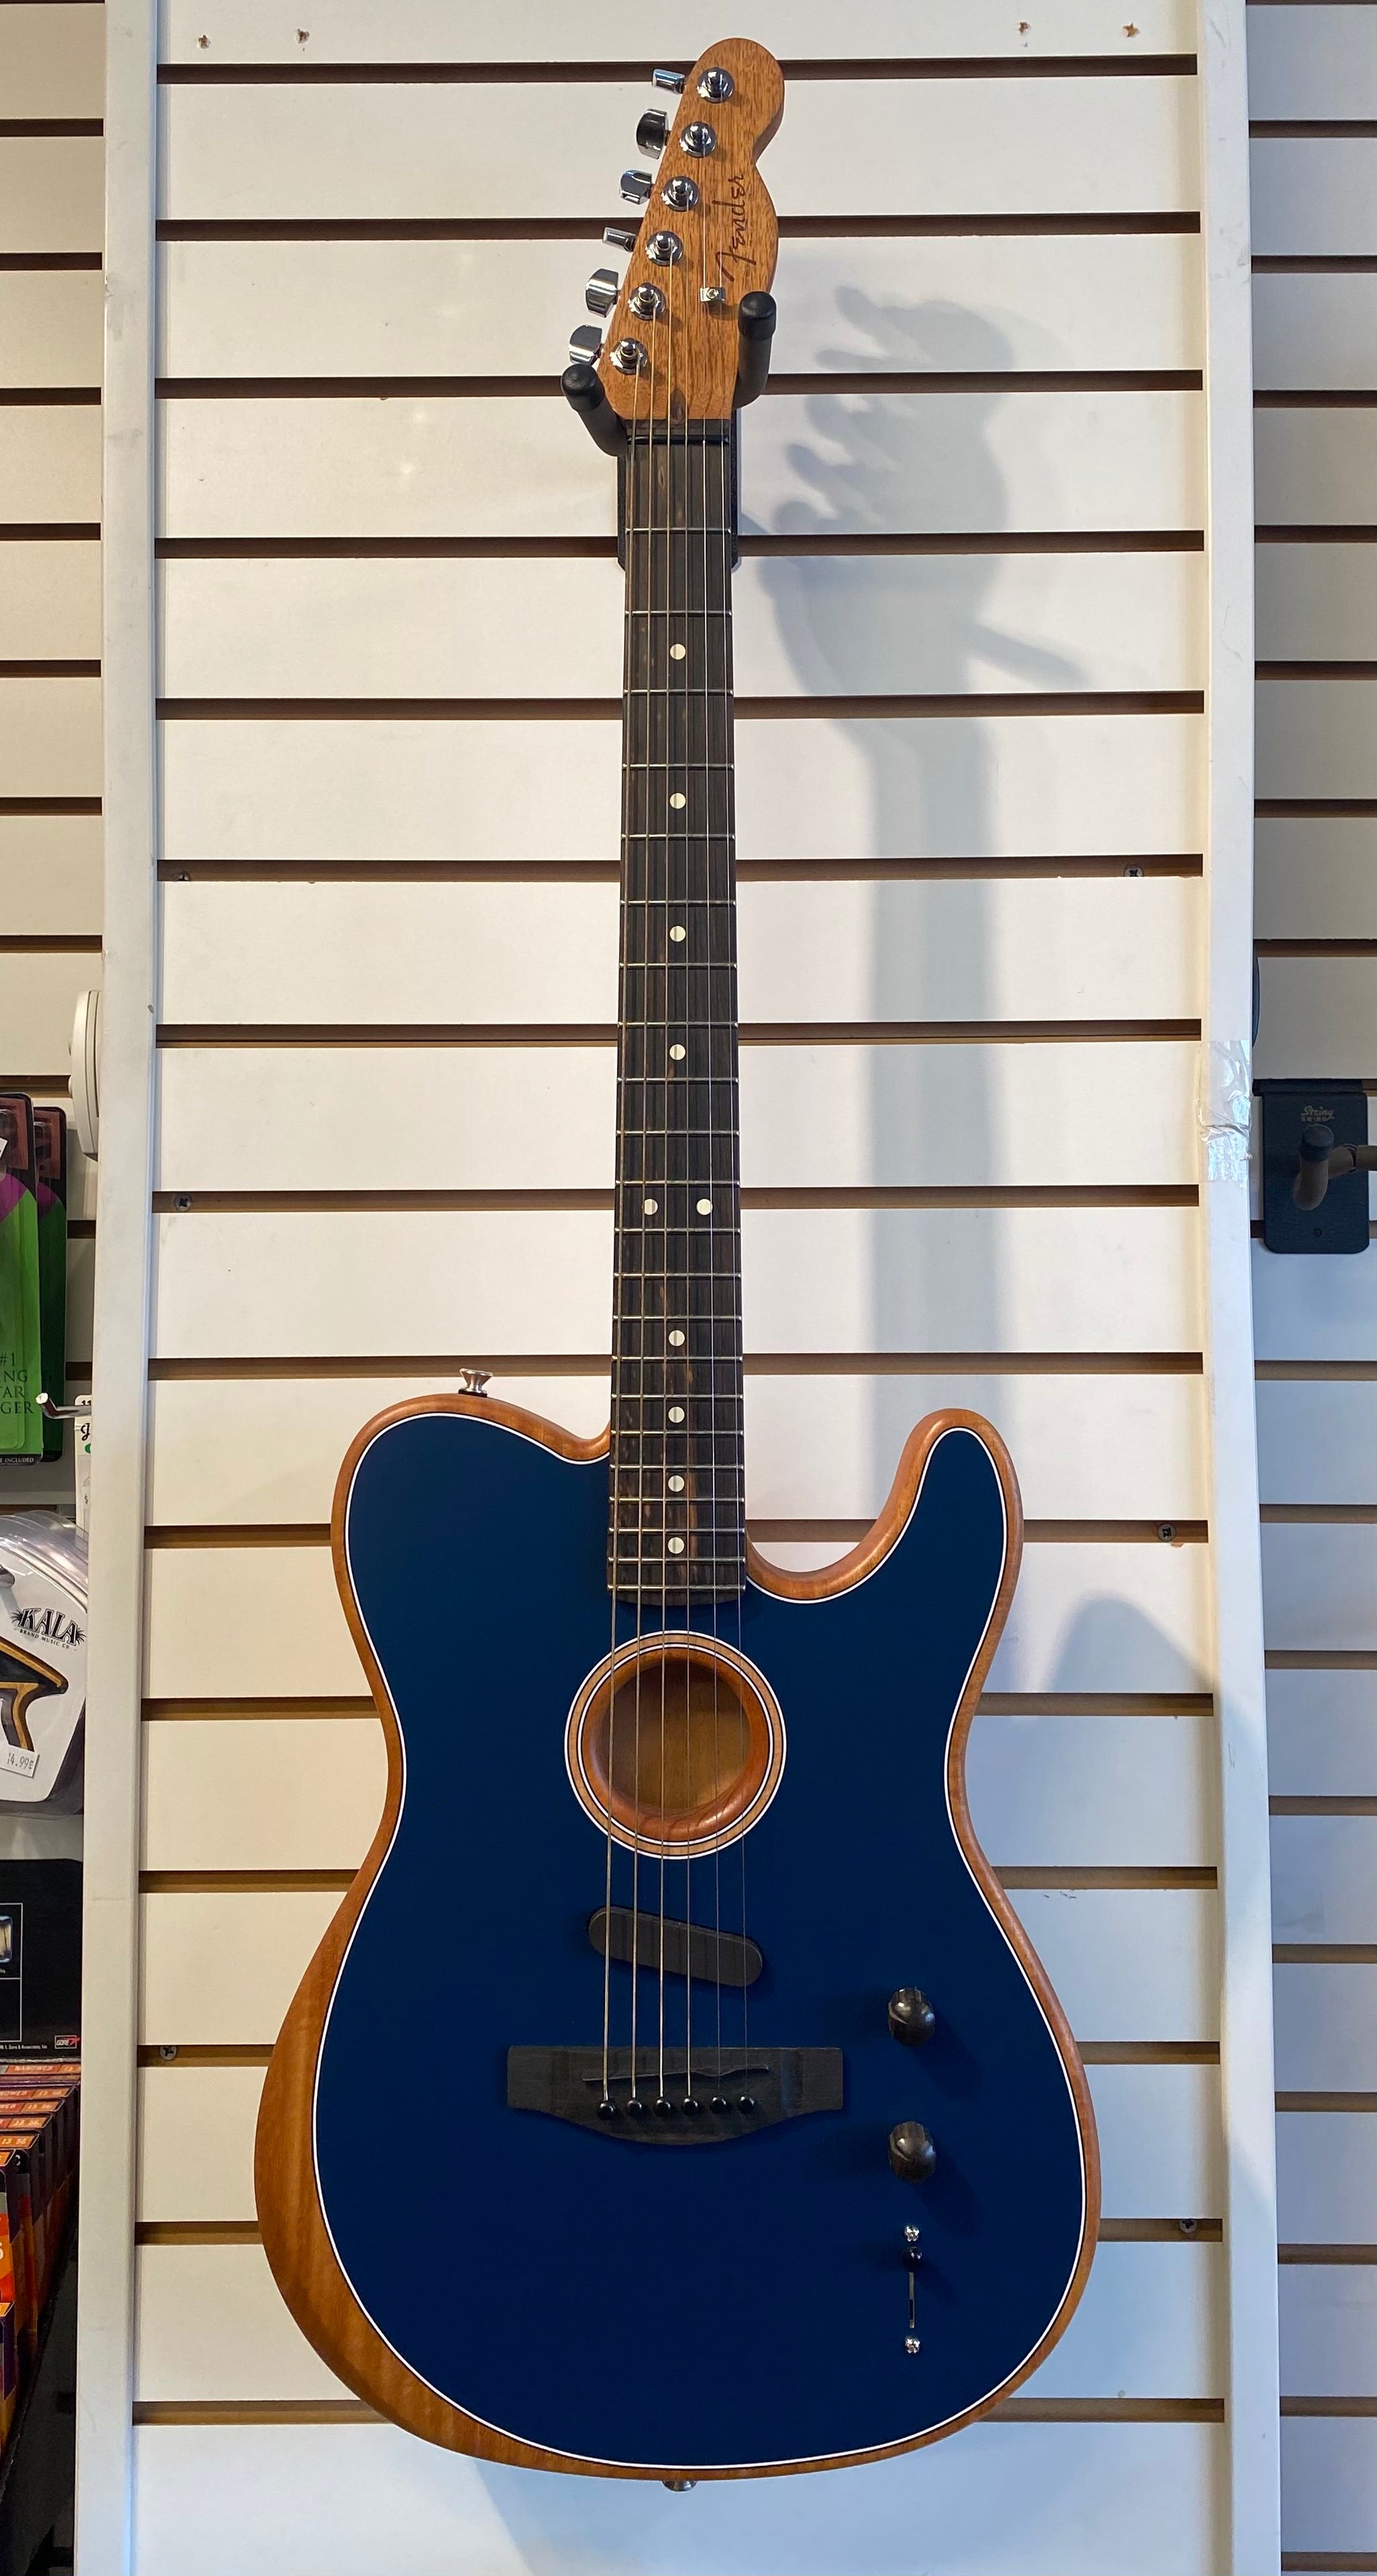 Fender® Made-in-USA Acoustasonic Telecaster Acoustic-Electric Guitar - Steel Blue